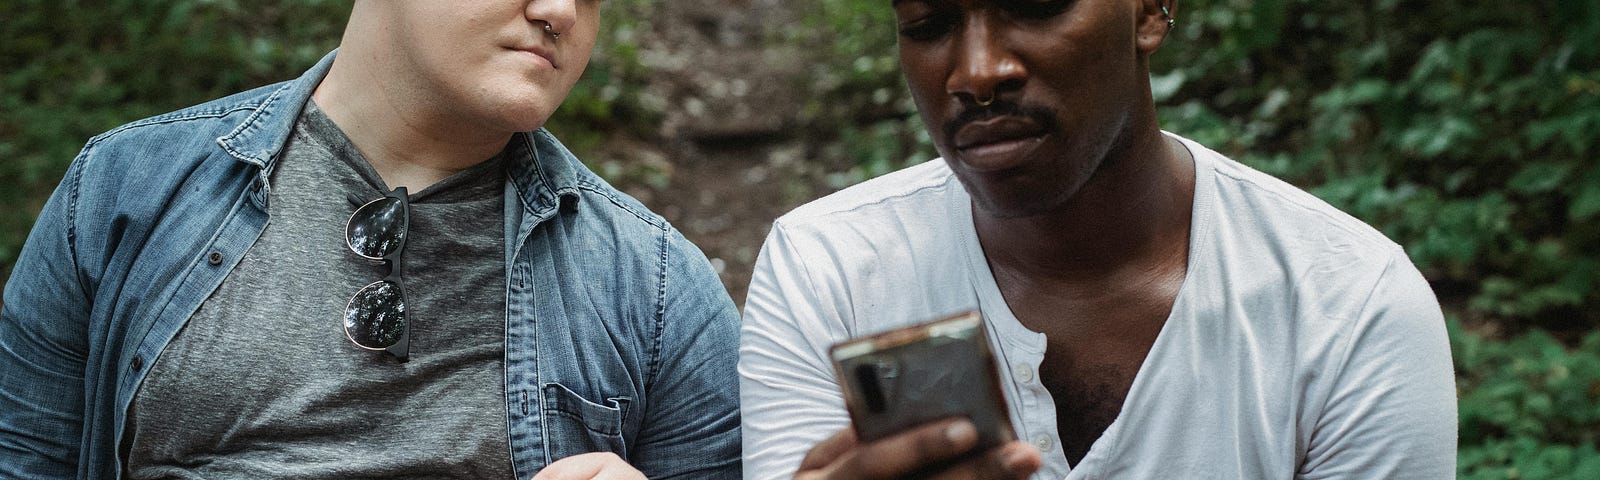 Pensive friends browsing smartphone in forest in daytime